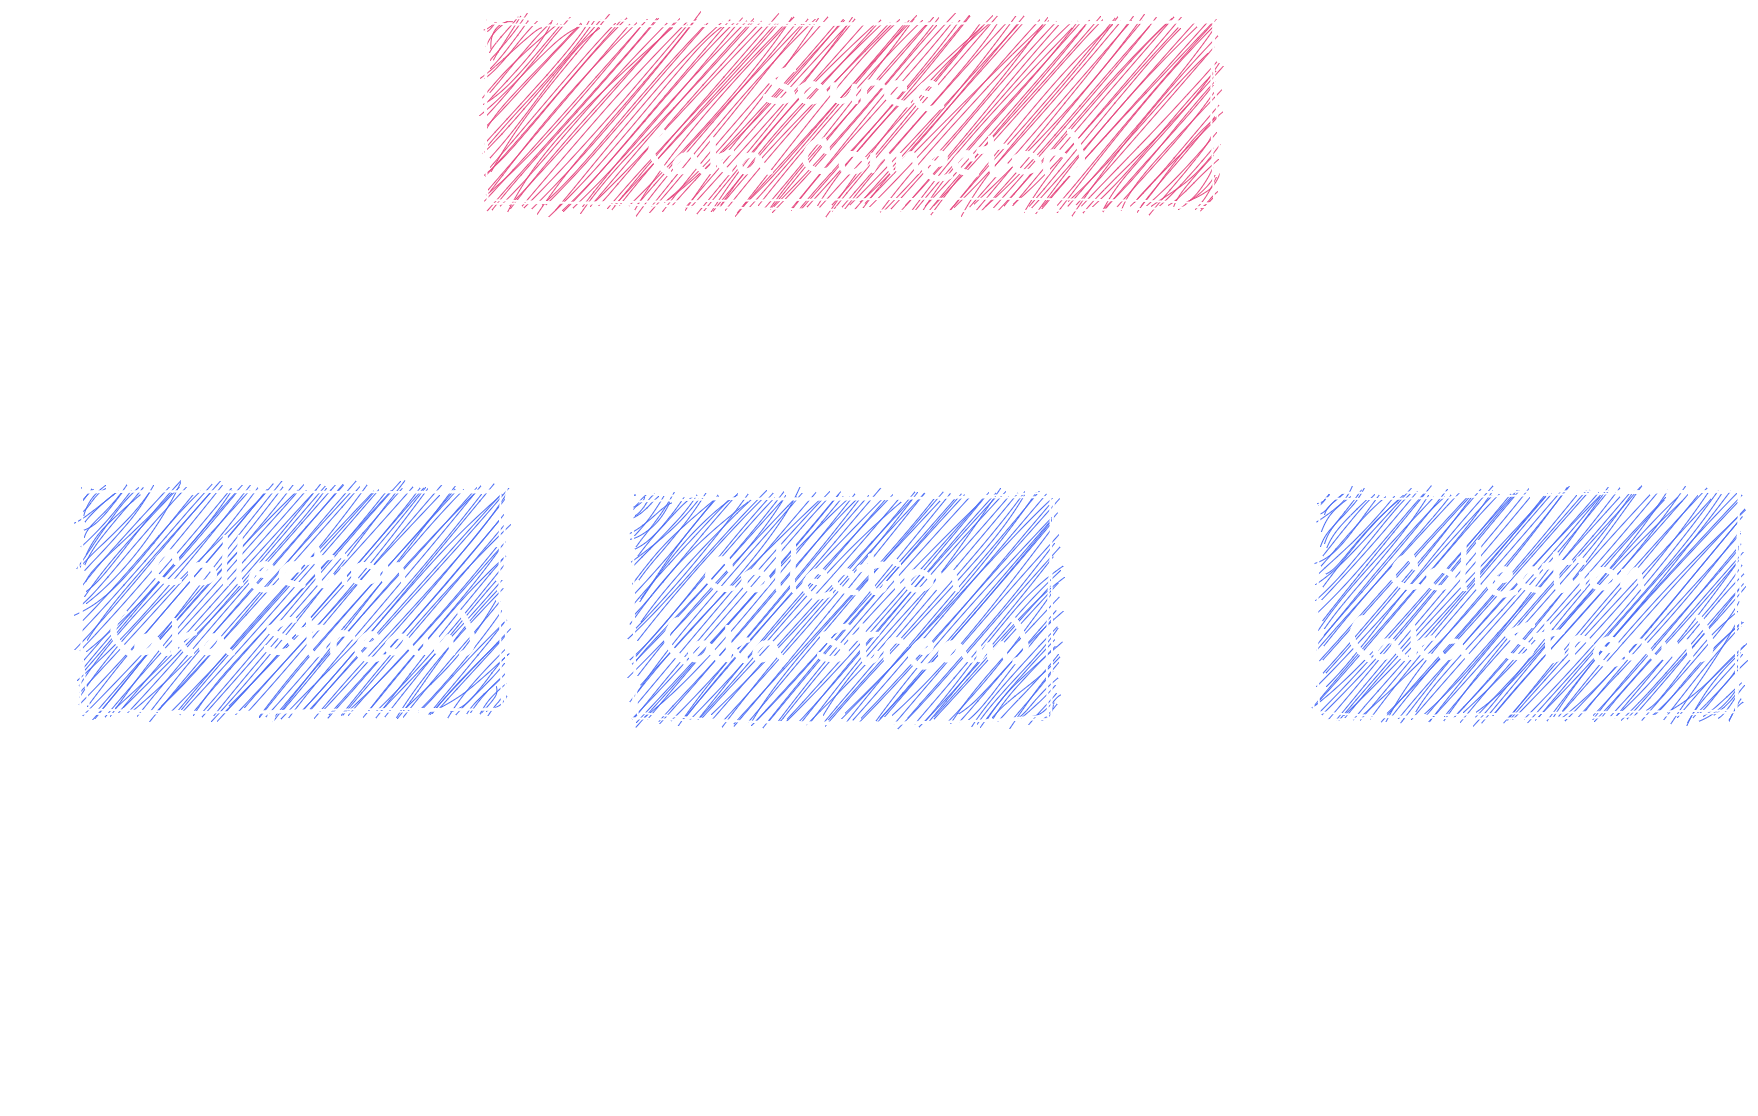 Sources (connectors) and Collection (streams)